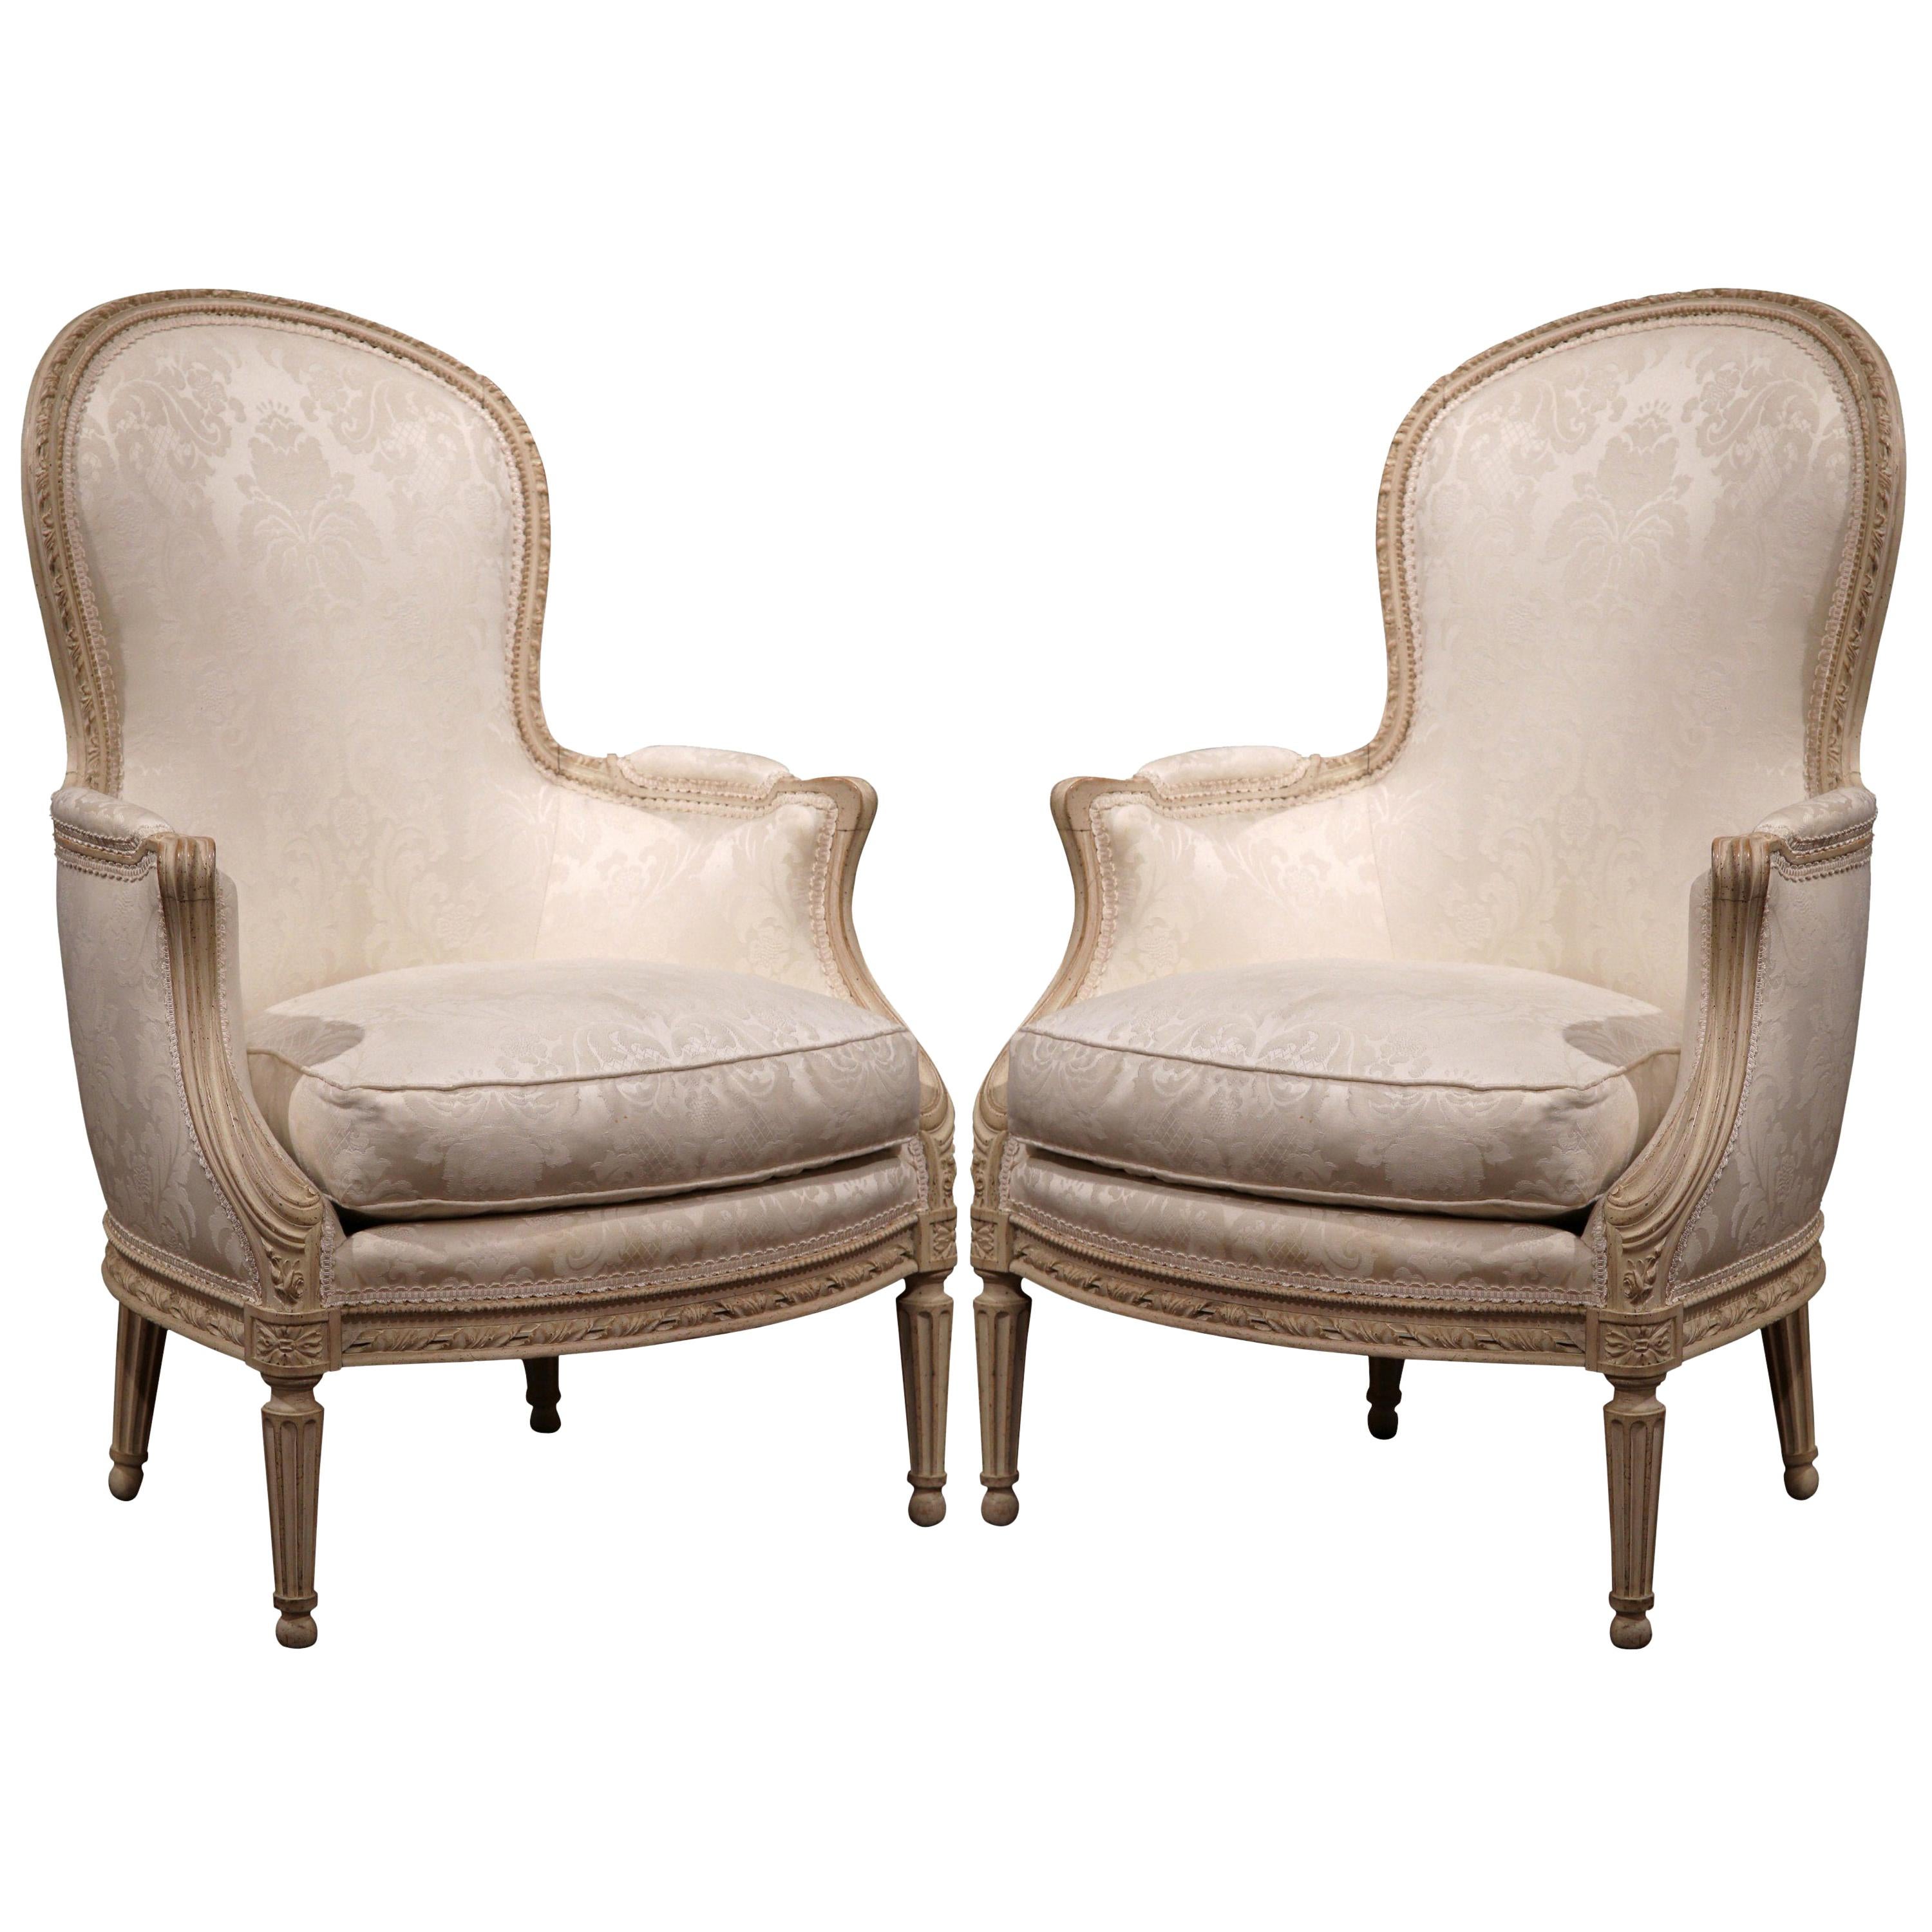 Pair of Midcentury French Louis XVI Carved Painted Bergères Armchairs